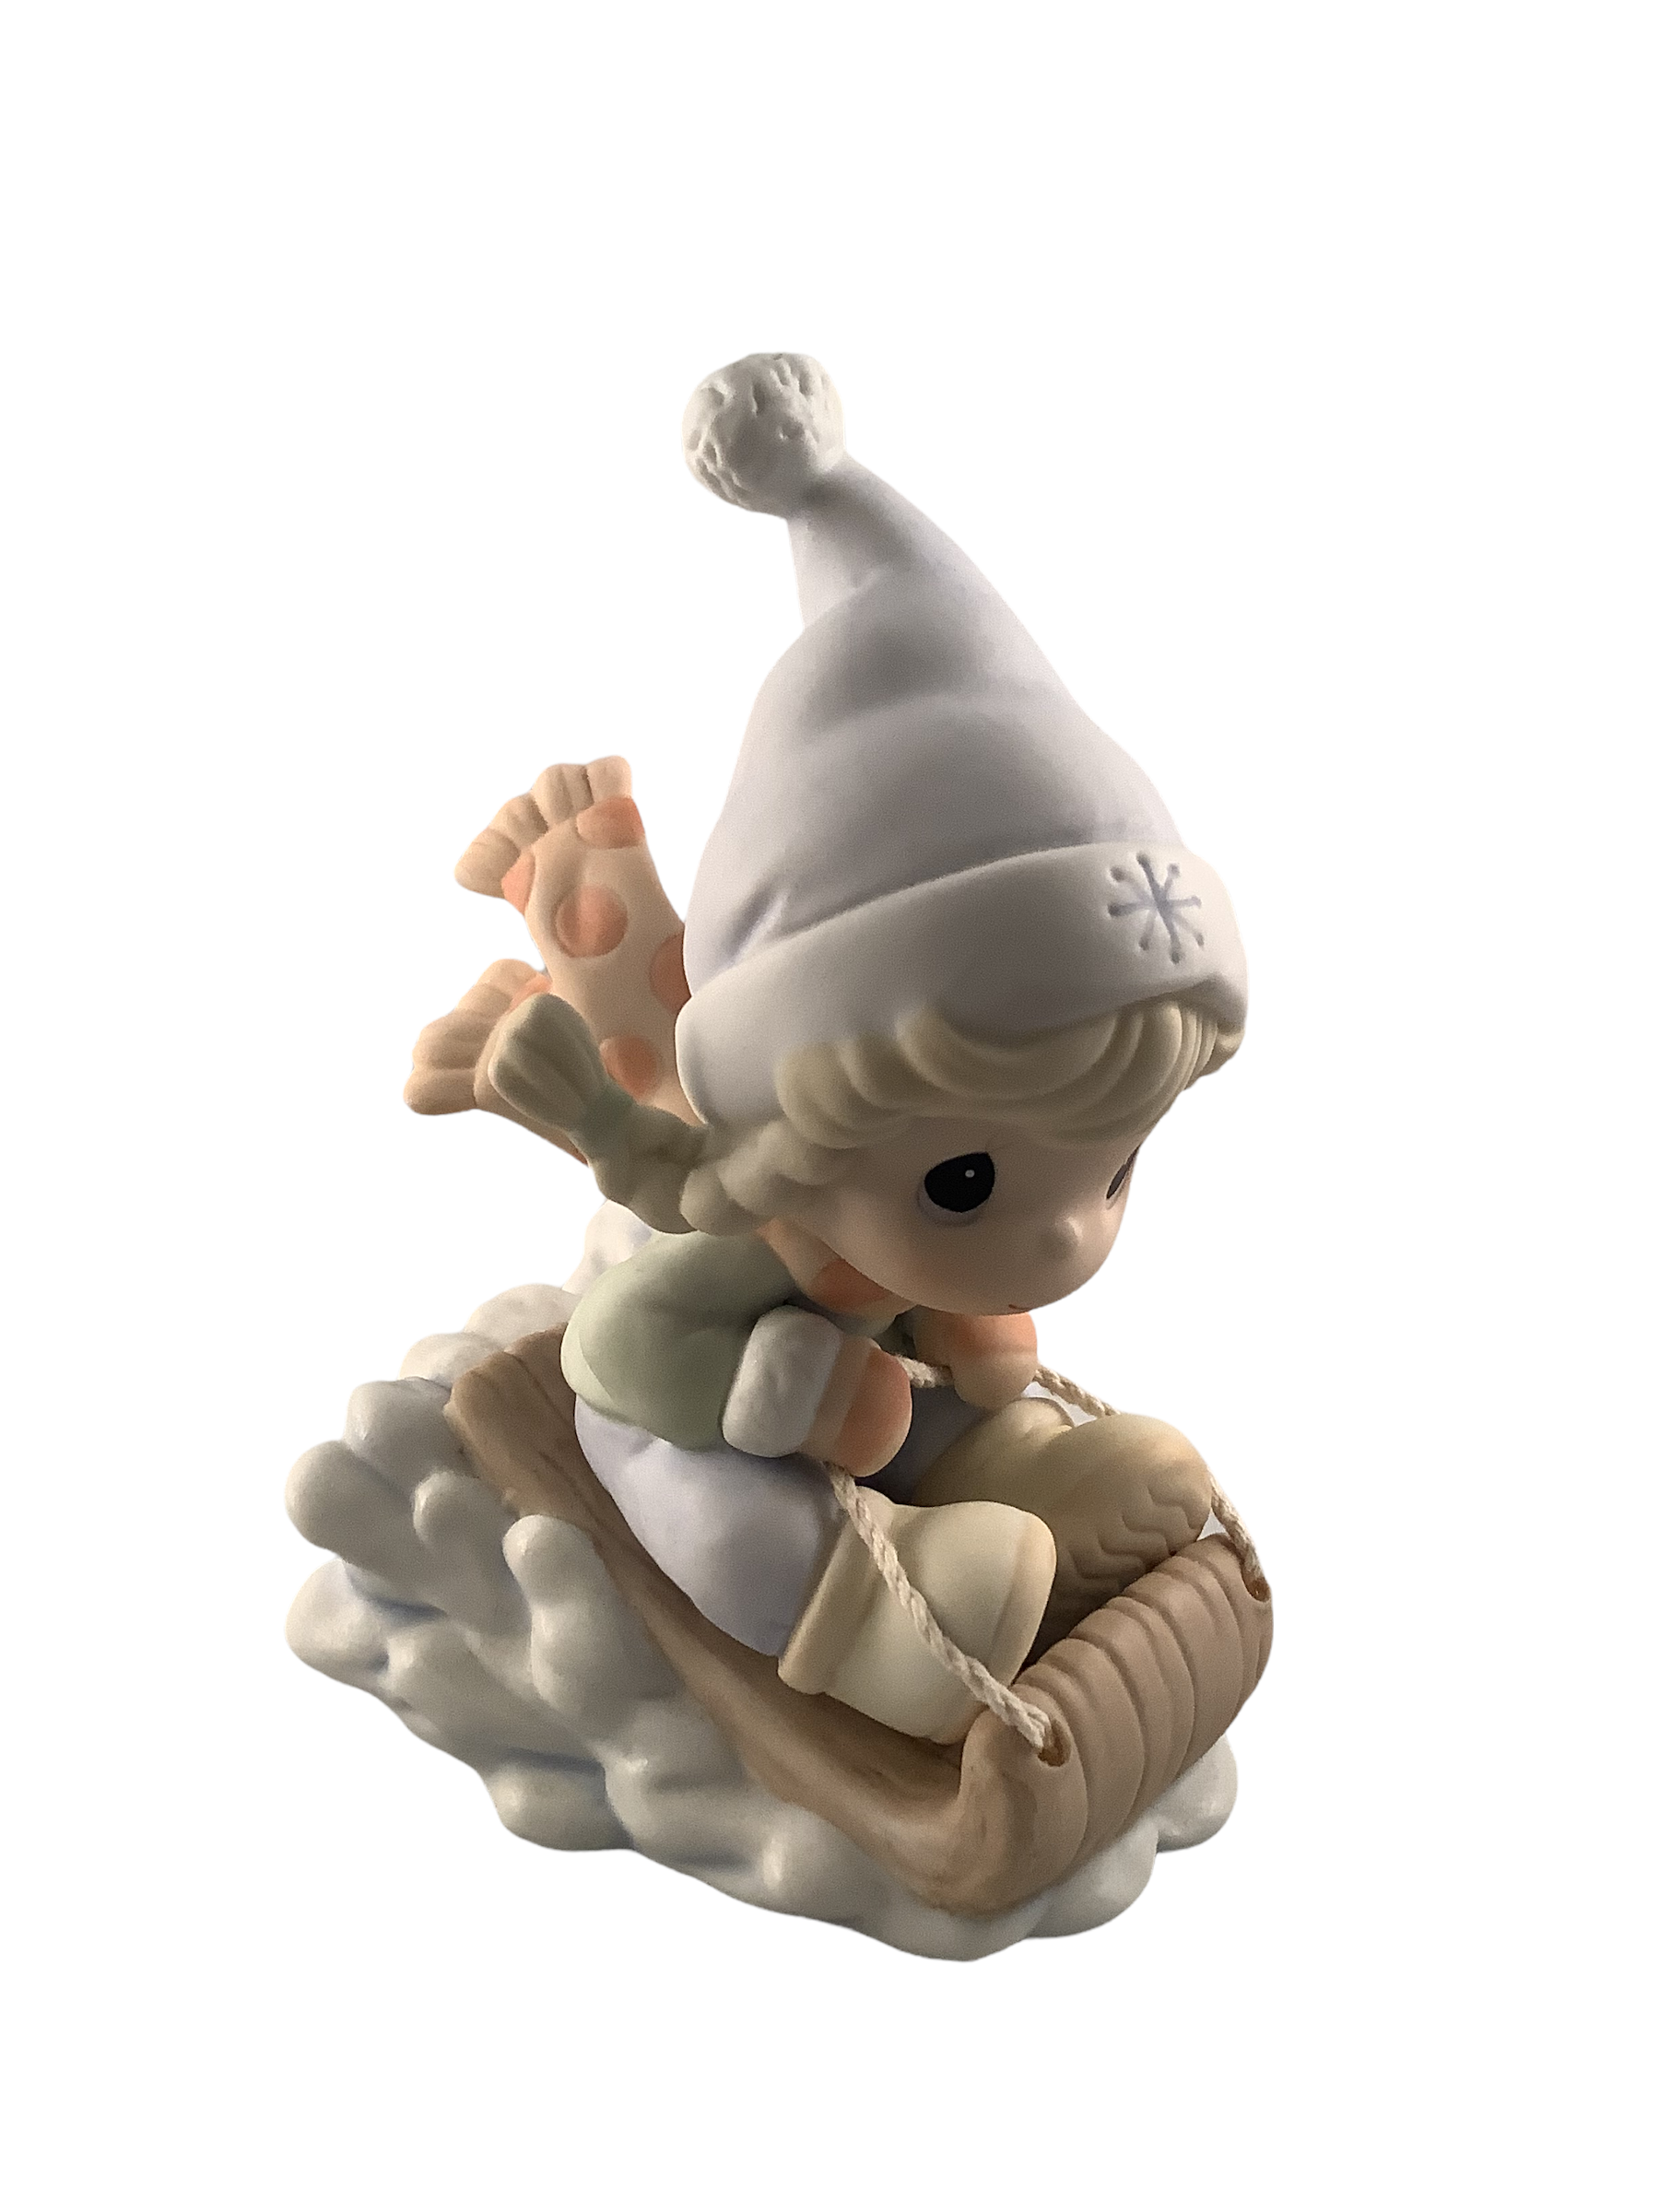 Let Your Spirit Soar With The Glee Of The Season - Precious Moment Figurine